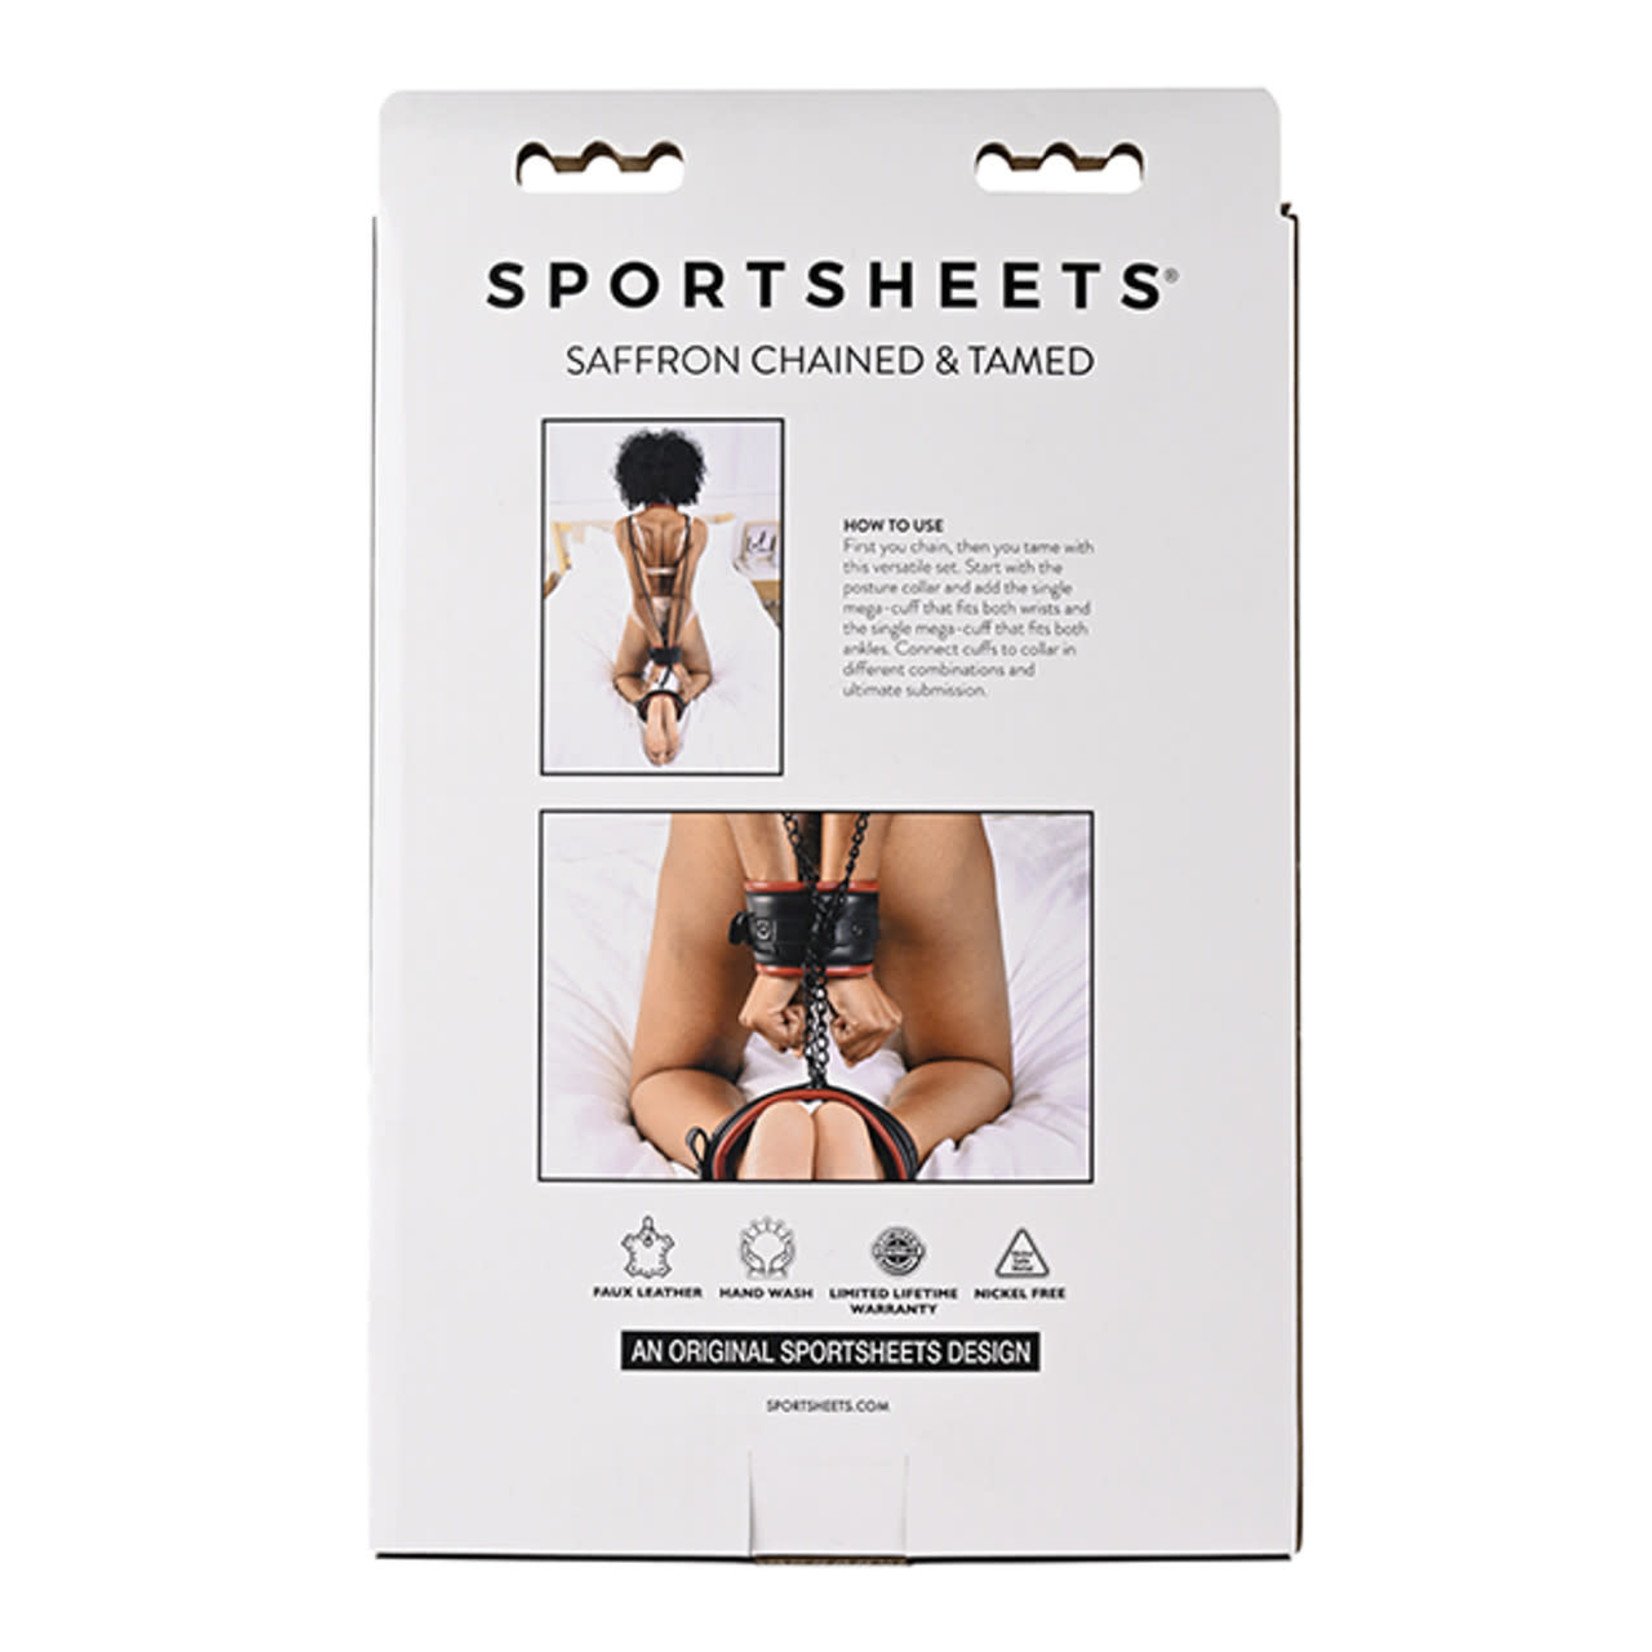 SPORTSHEETS SAFFRON CHAINED AND TAMED RESTRAINT KIT